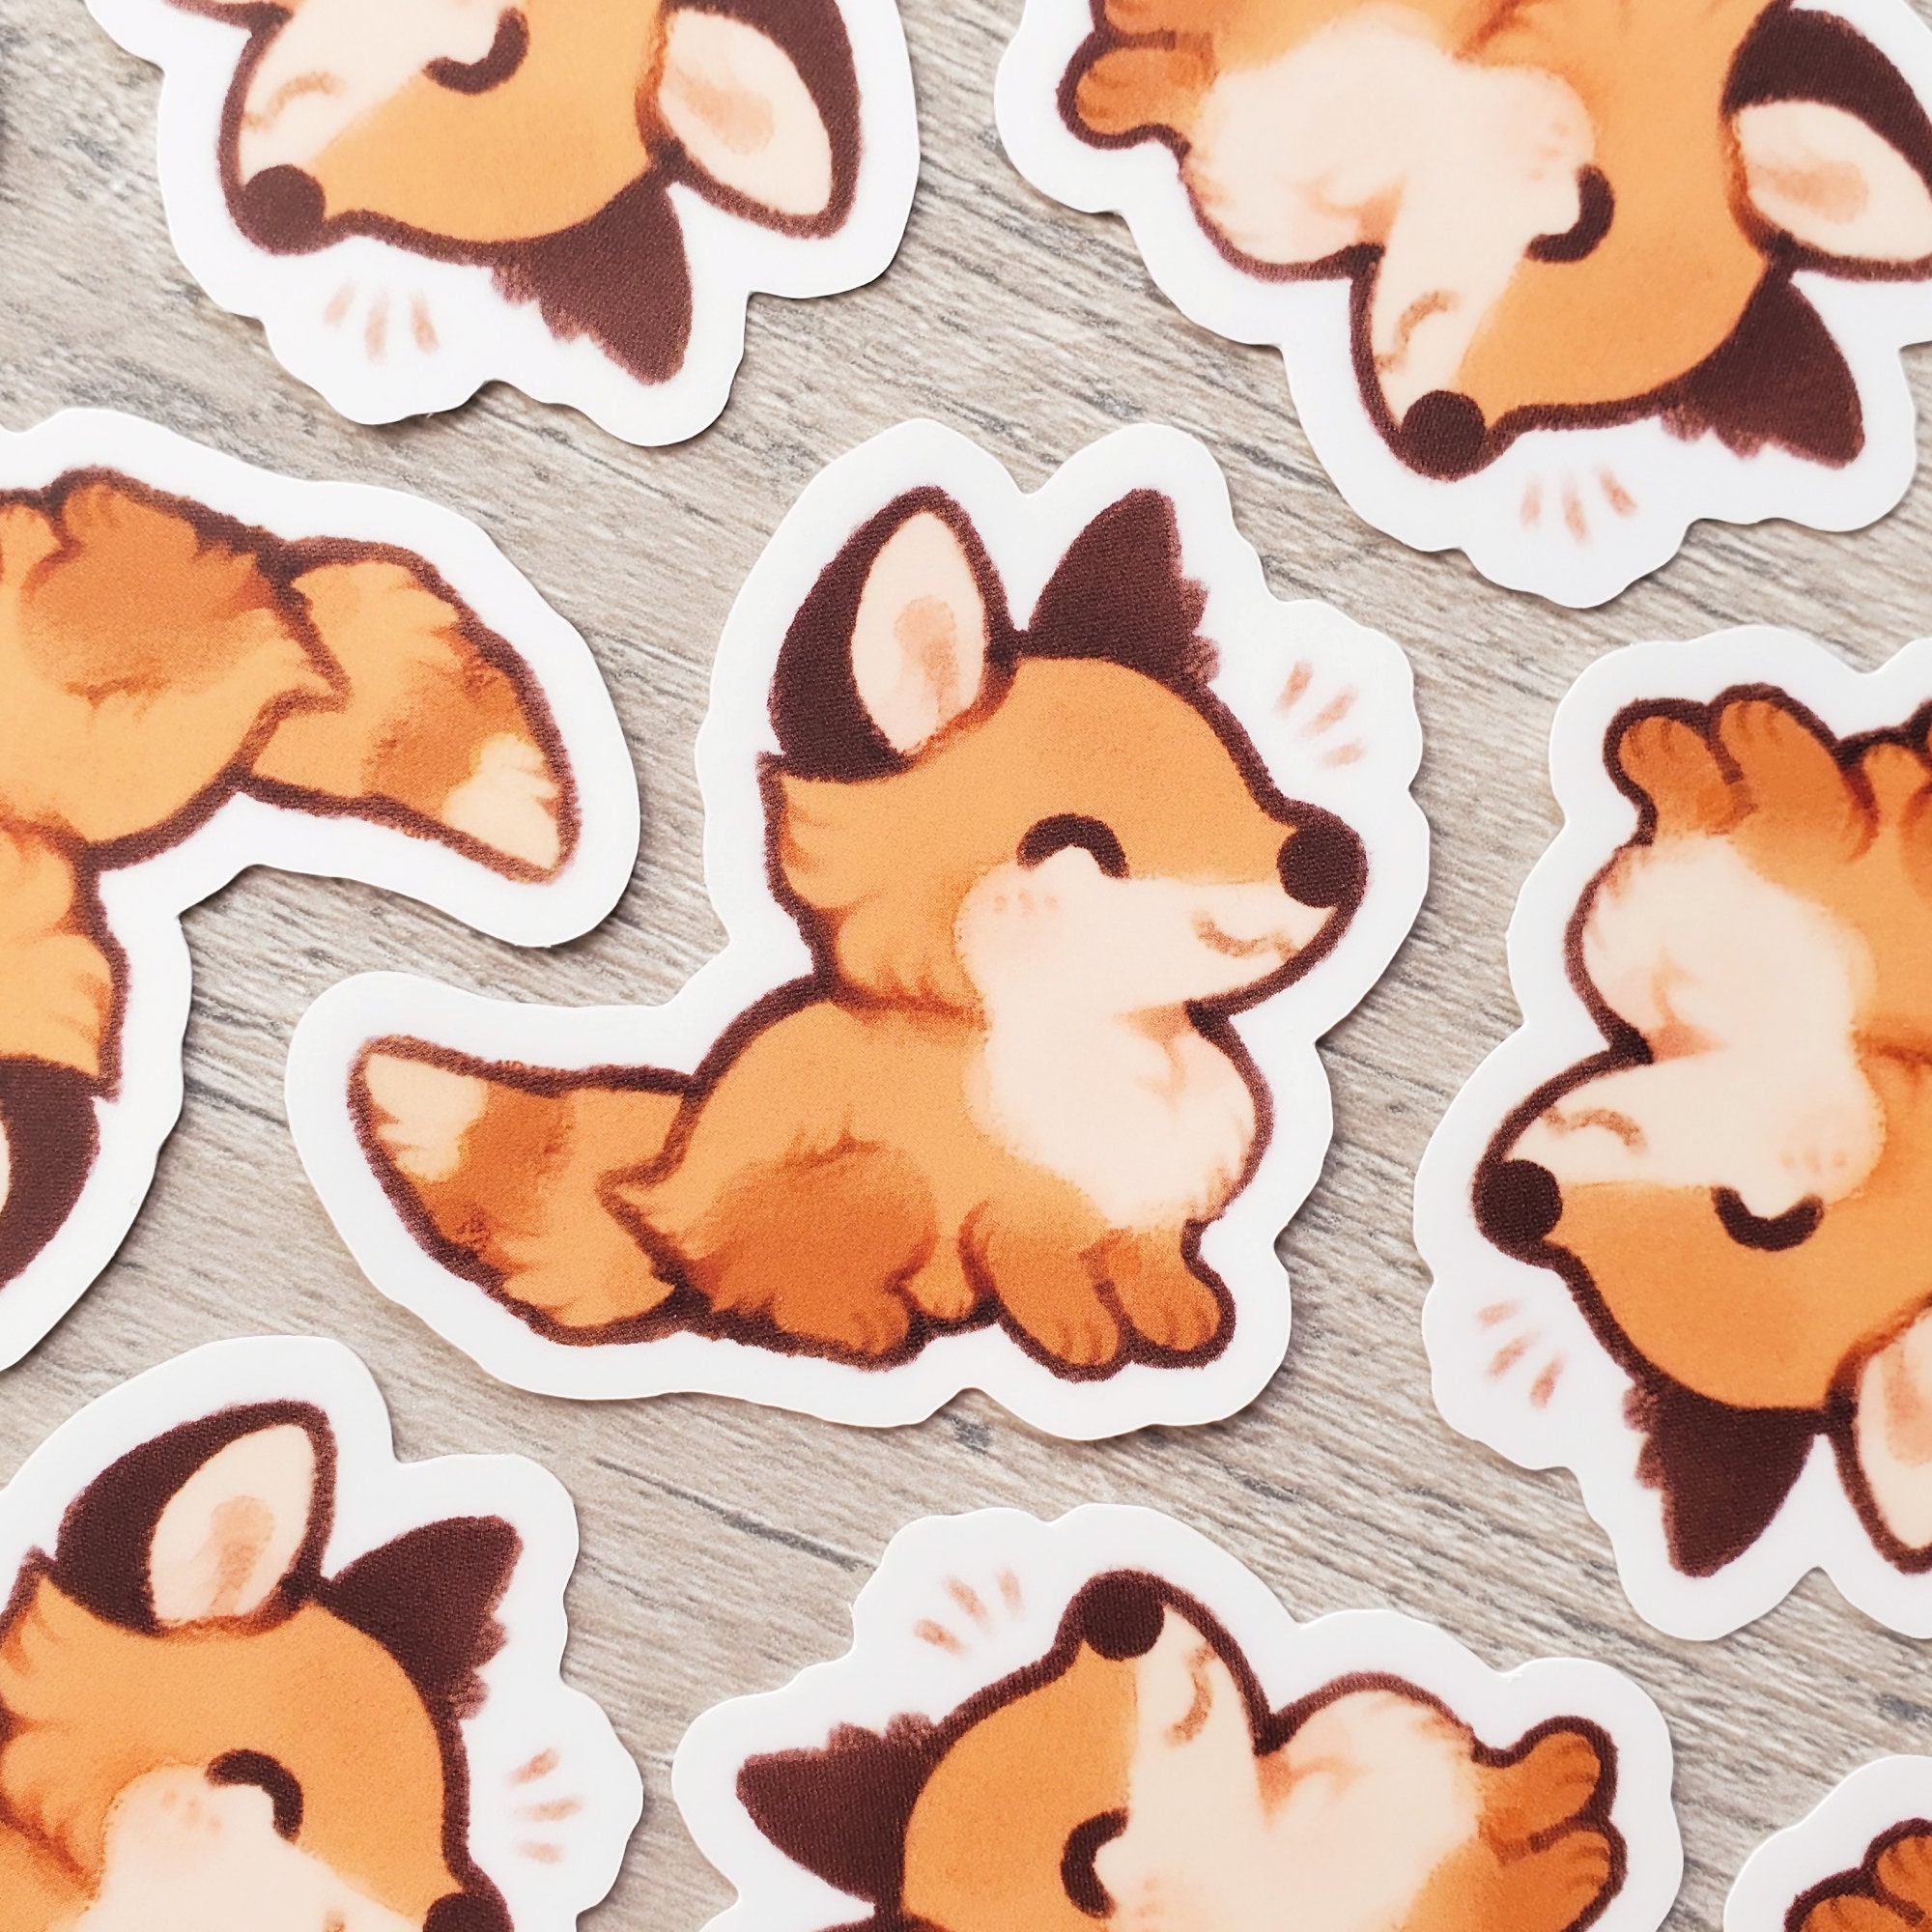 Fuzzy Fox & Camels Stickers by Funny Sticker World